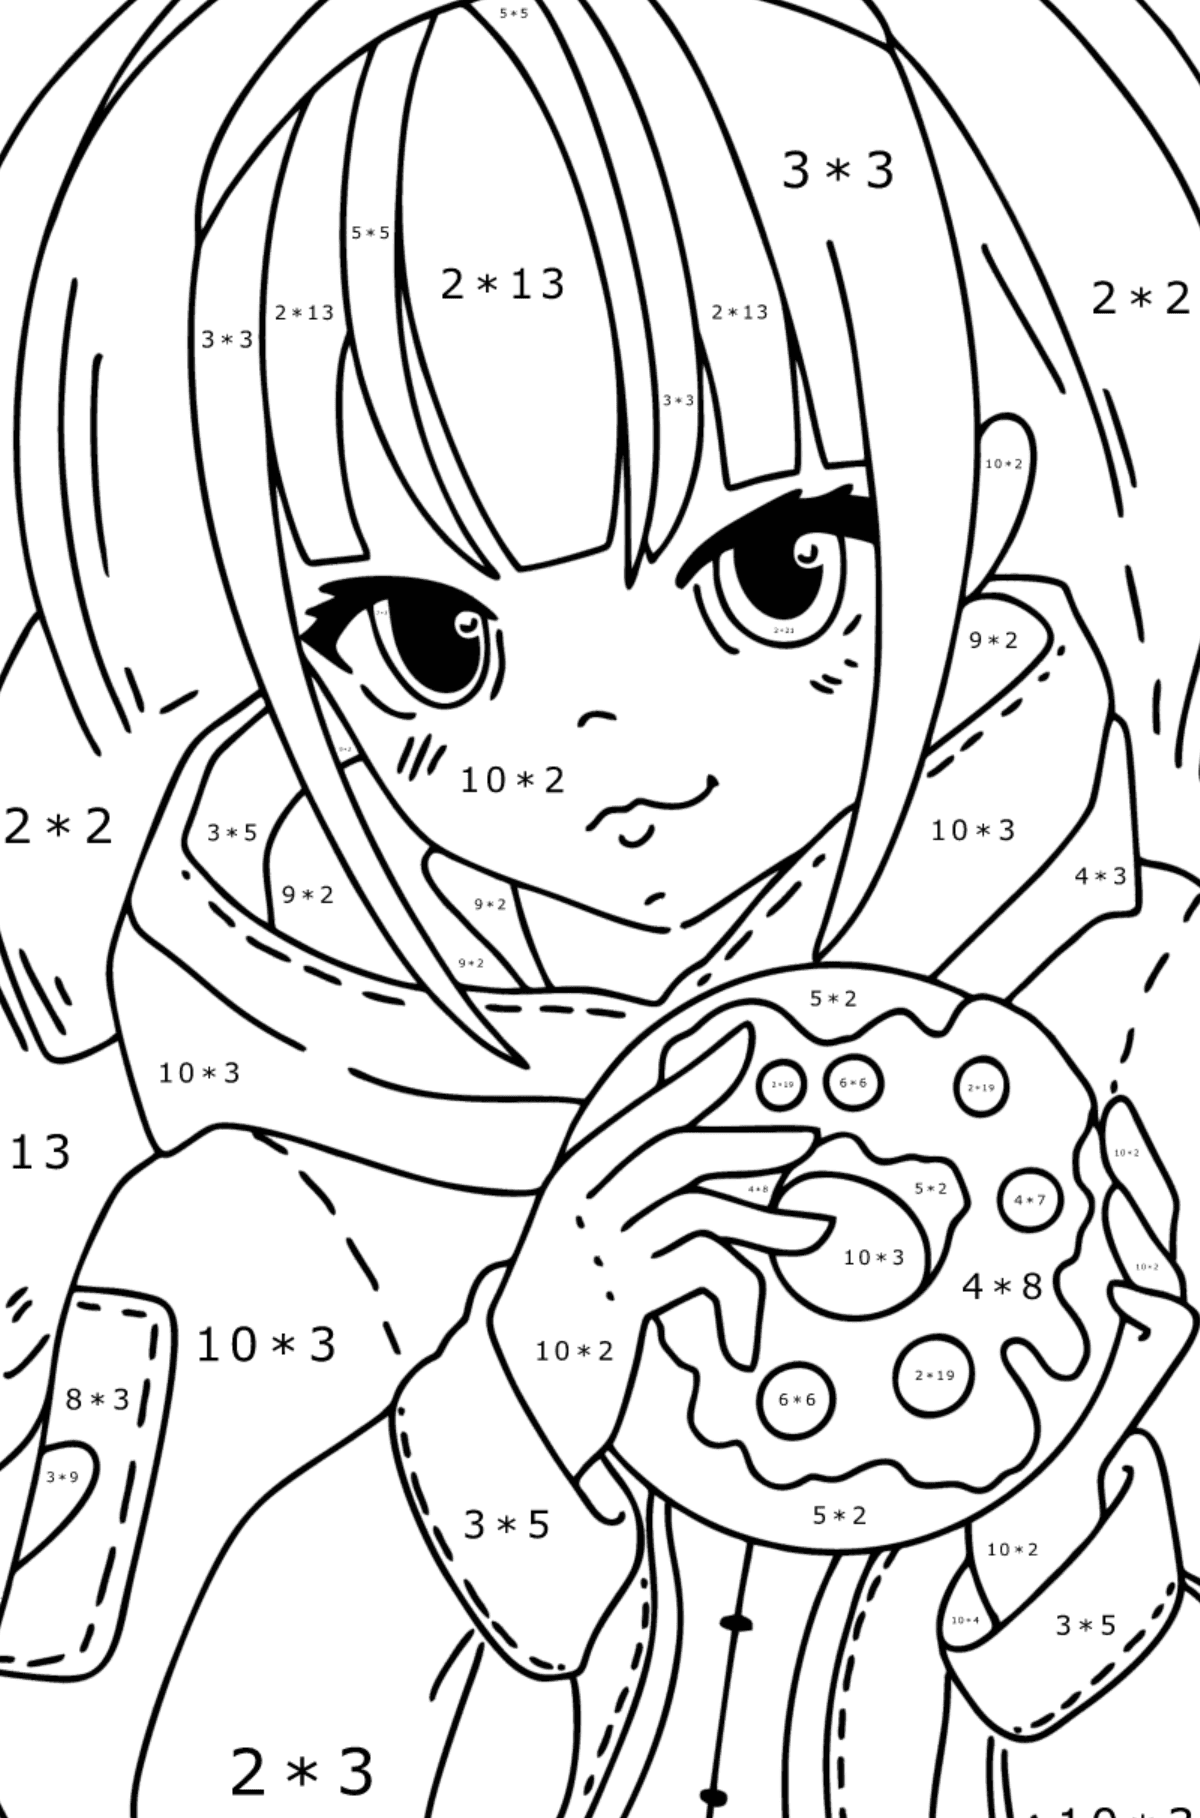 Japanese anime girl coloring page - Math Coloring - Multiplication for Kids